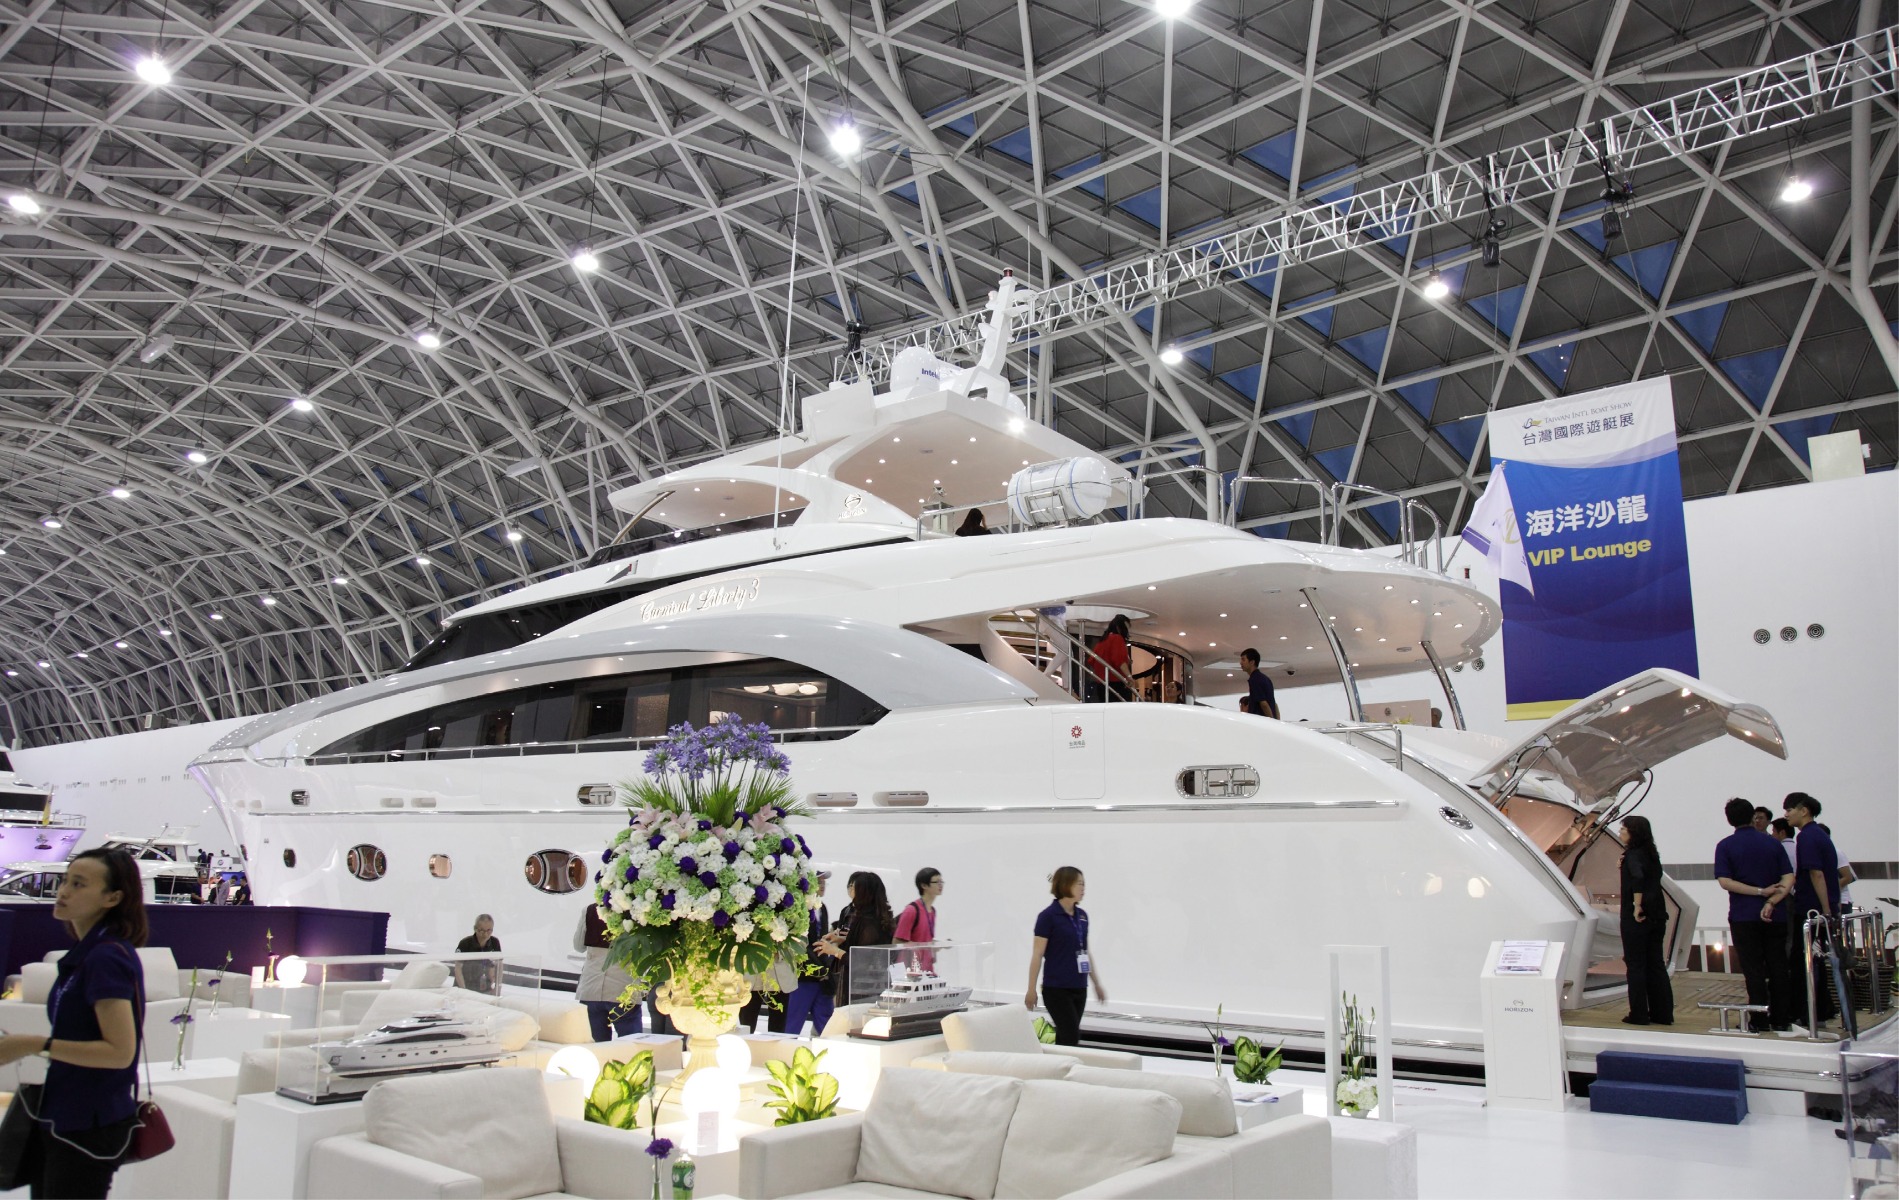 Hering Berlin at Monte Carlo Yacht show